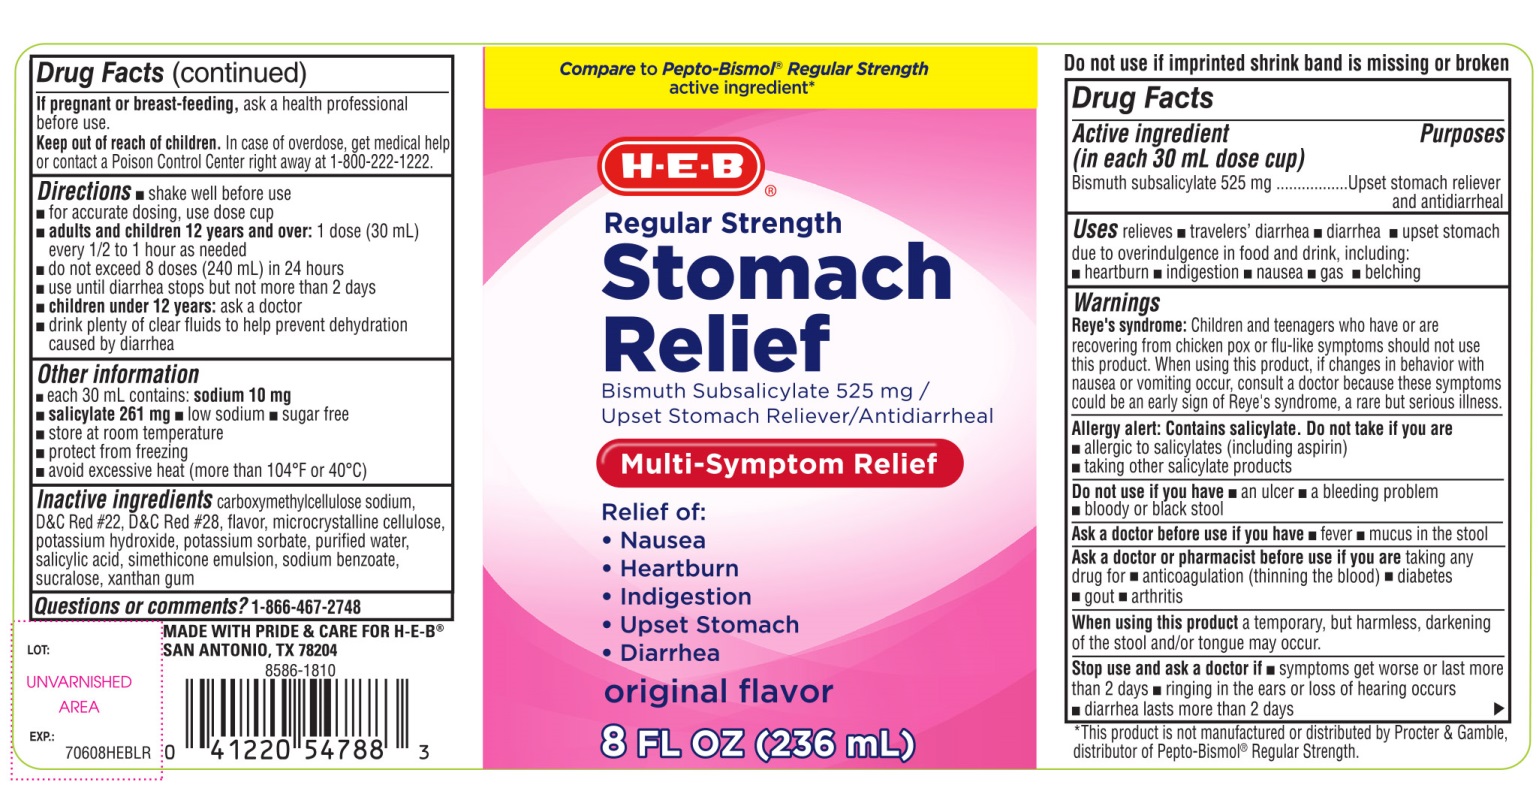 Is Heb Stomach Relief Regular Strength | Bismuth Subsalicylate Suspension safe while breastfeeding